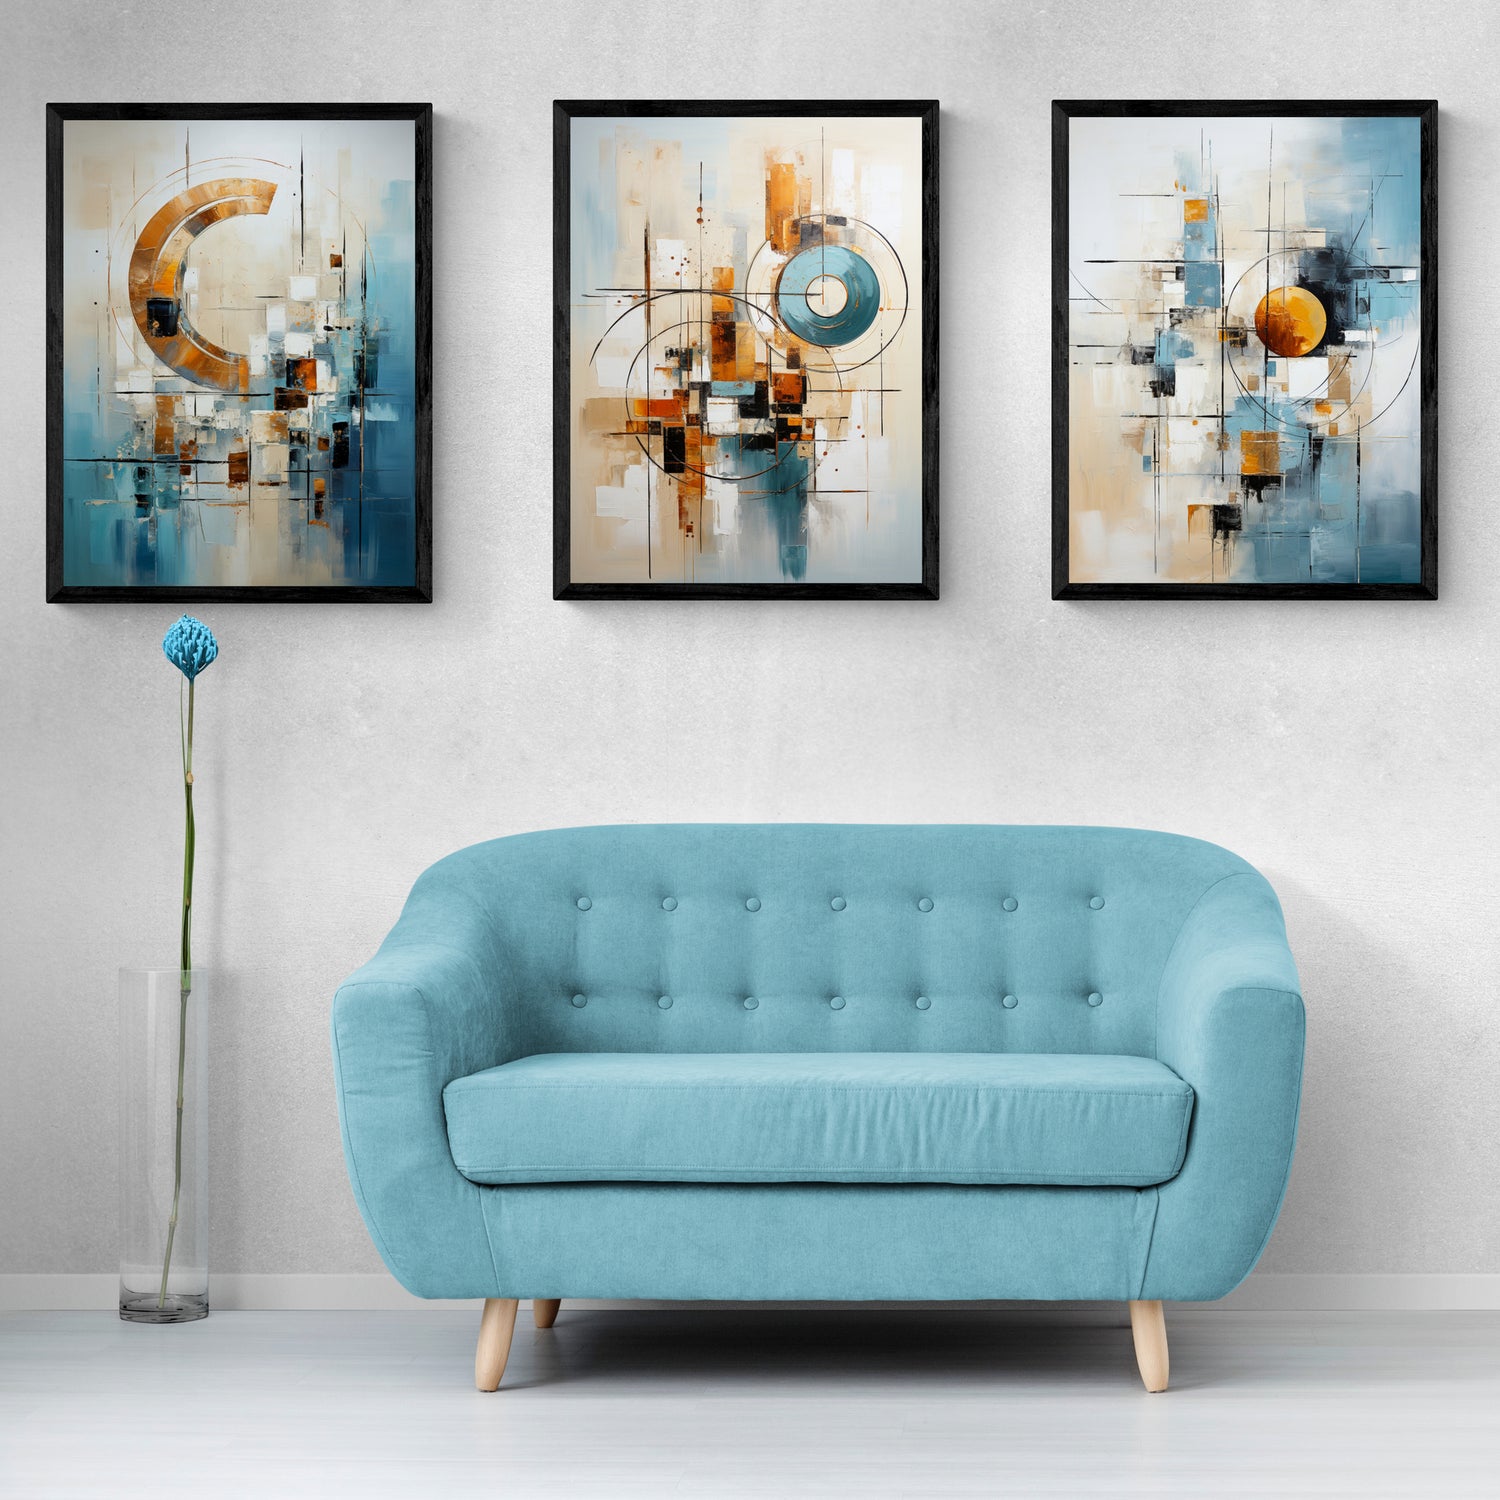 Gallery Wall Sets - Art Collections for your home